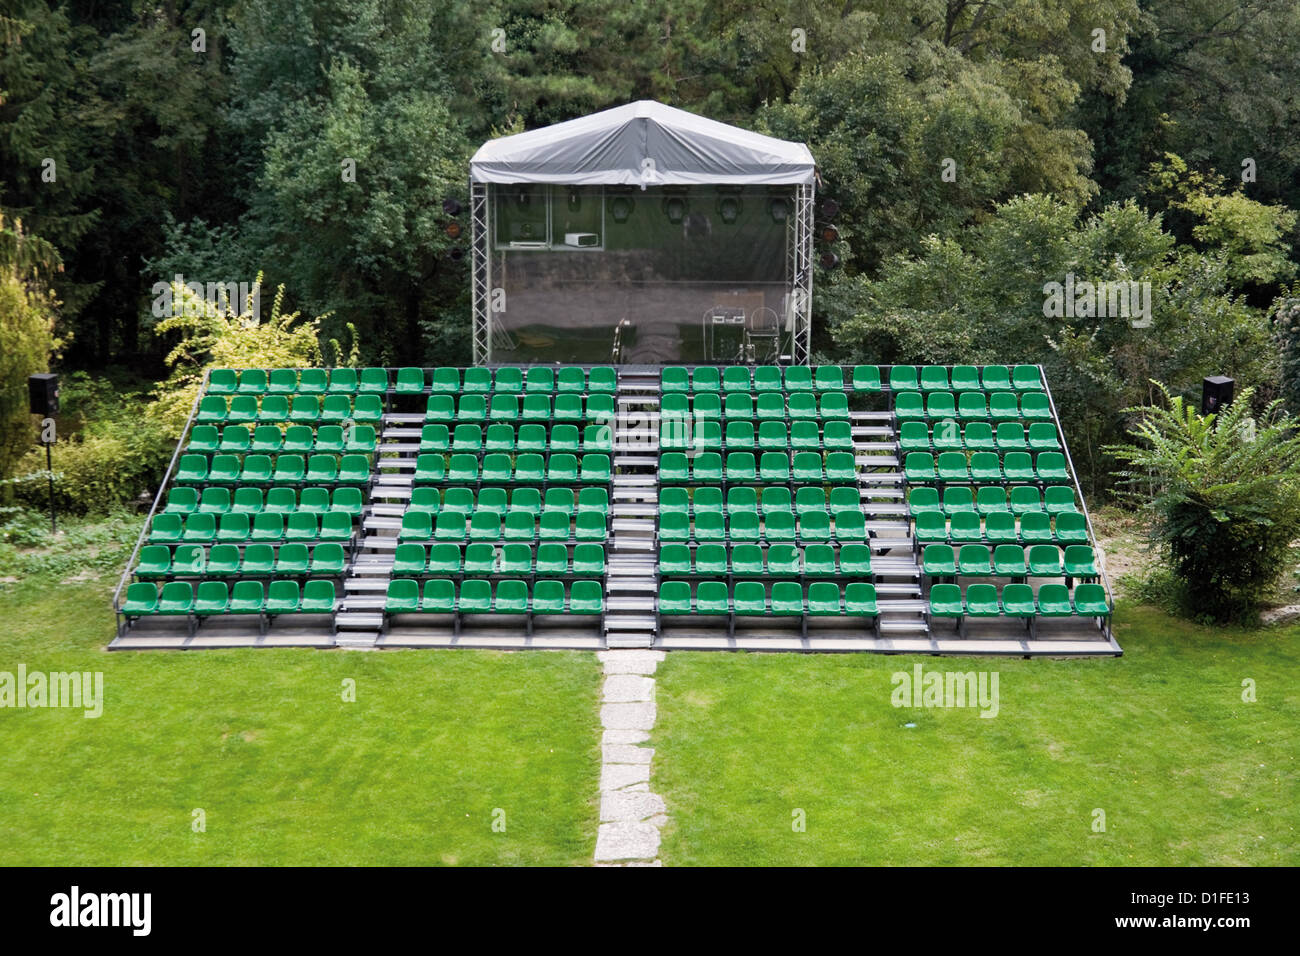 Empty open air amphitheater auditorium in the forest Stock Photo